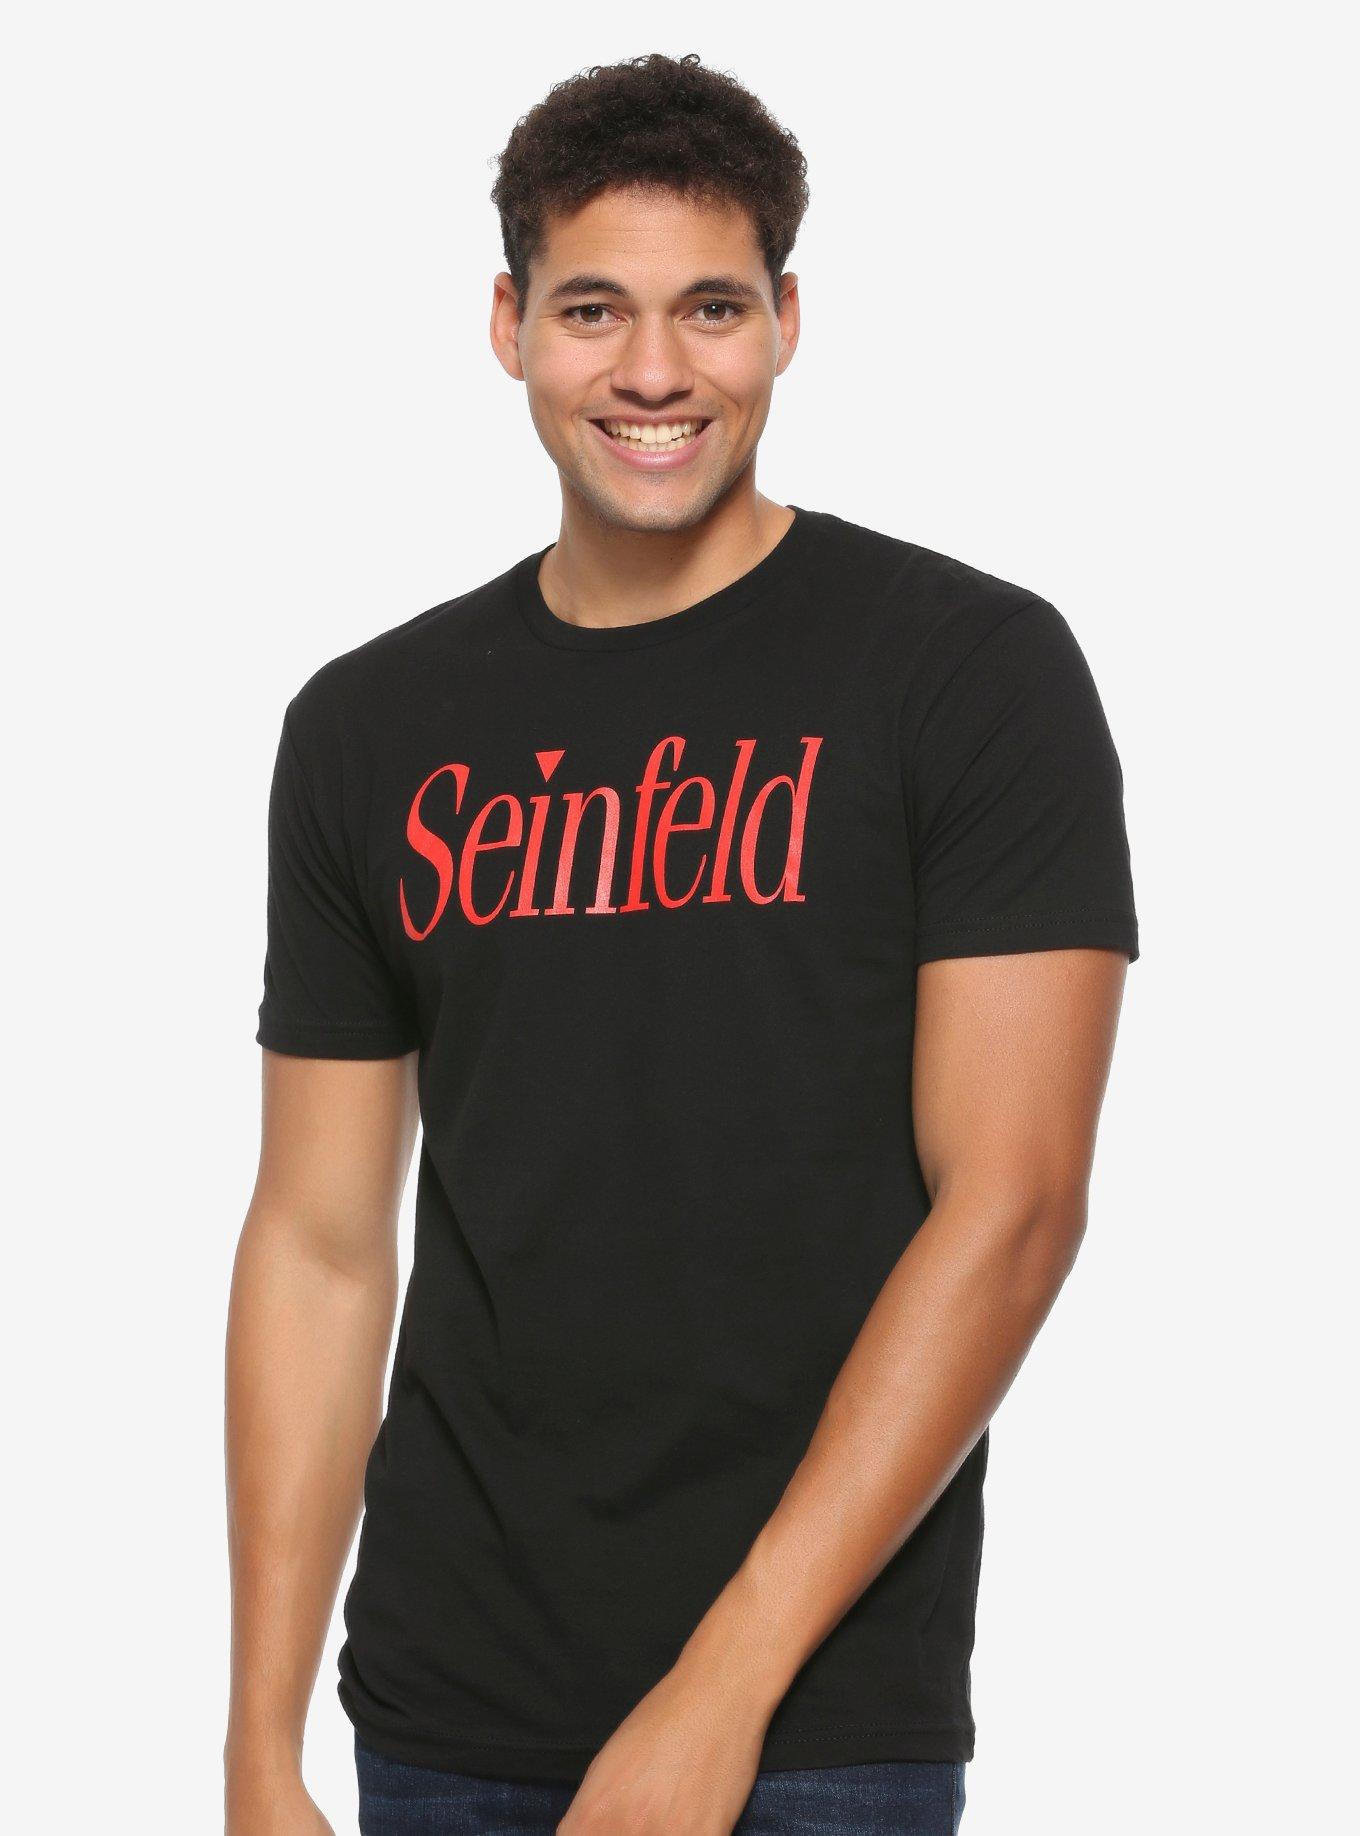 Seinfeld The Show About Nothing T-Shirt - BoxLunch Exclusive, BLACK, hi-res